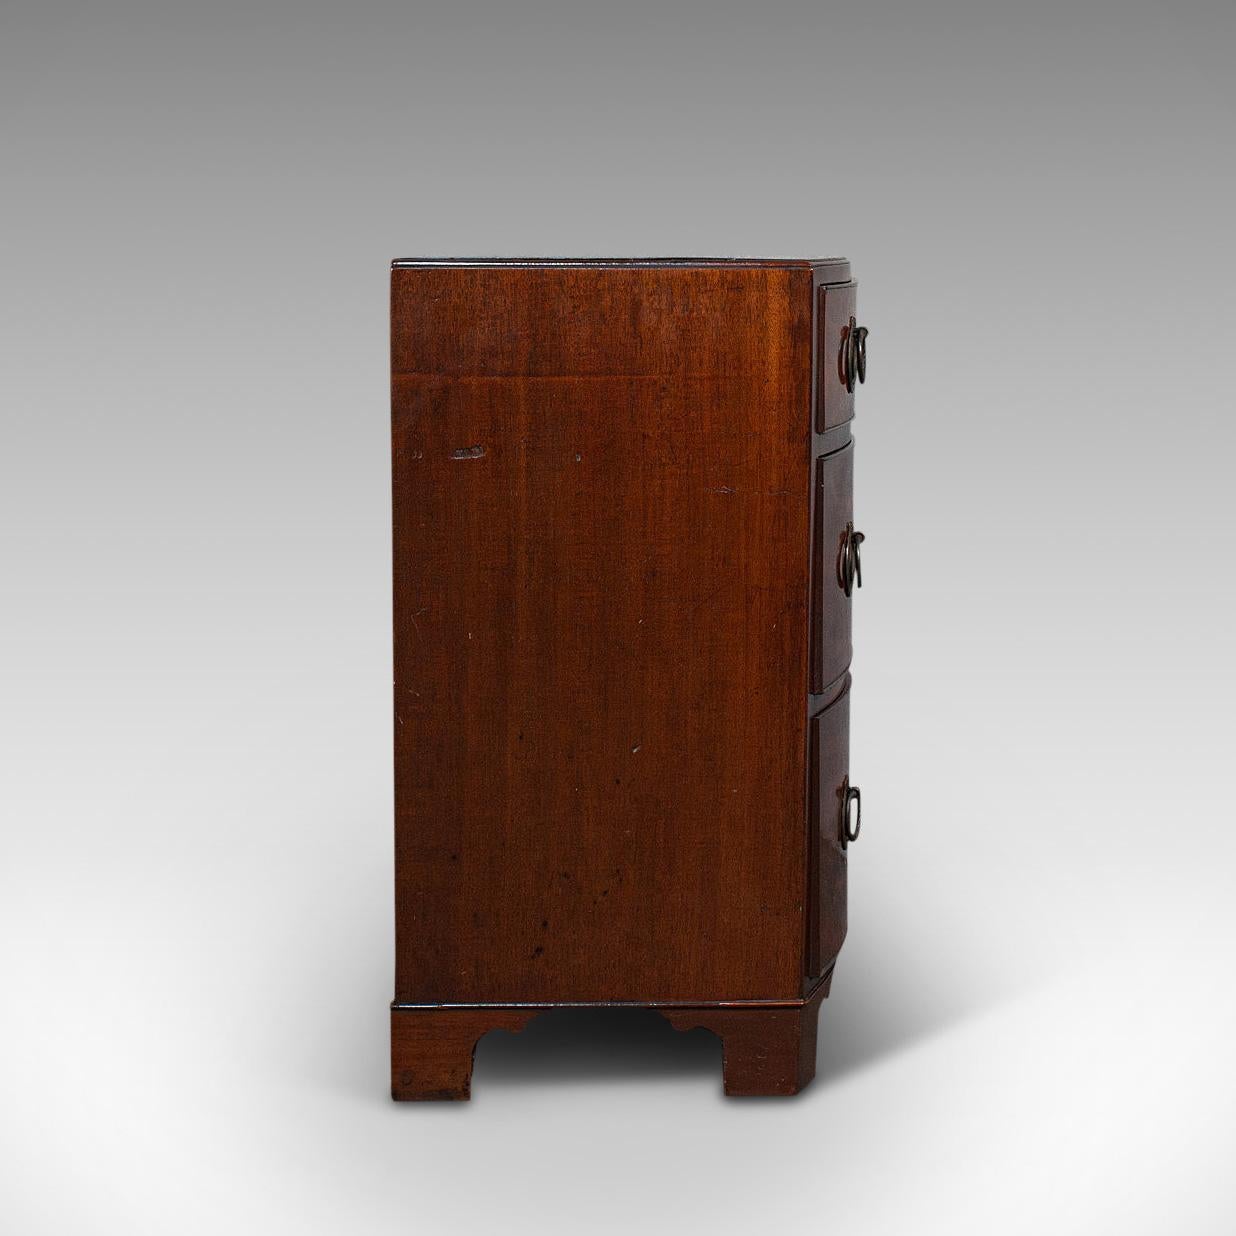 British Compact Antique Chest of Drawers, English, Mahogany, Bedside Stand, Georgian